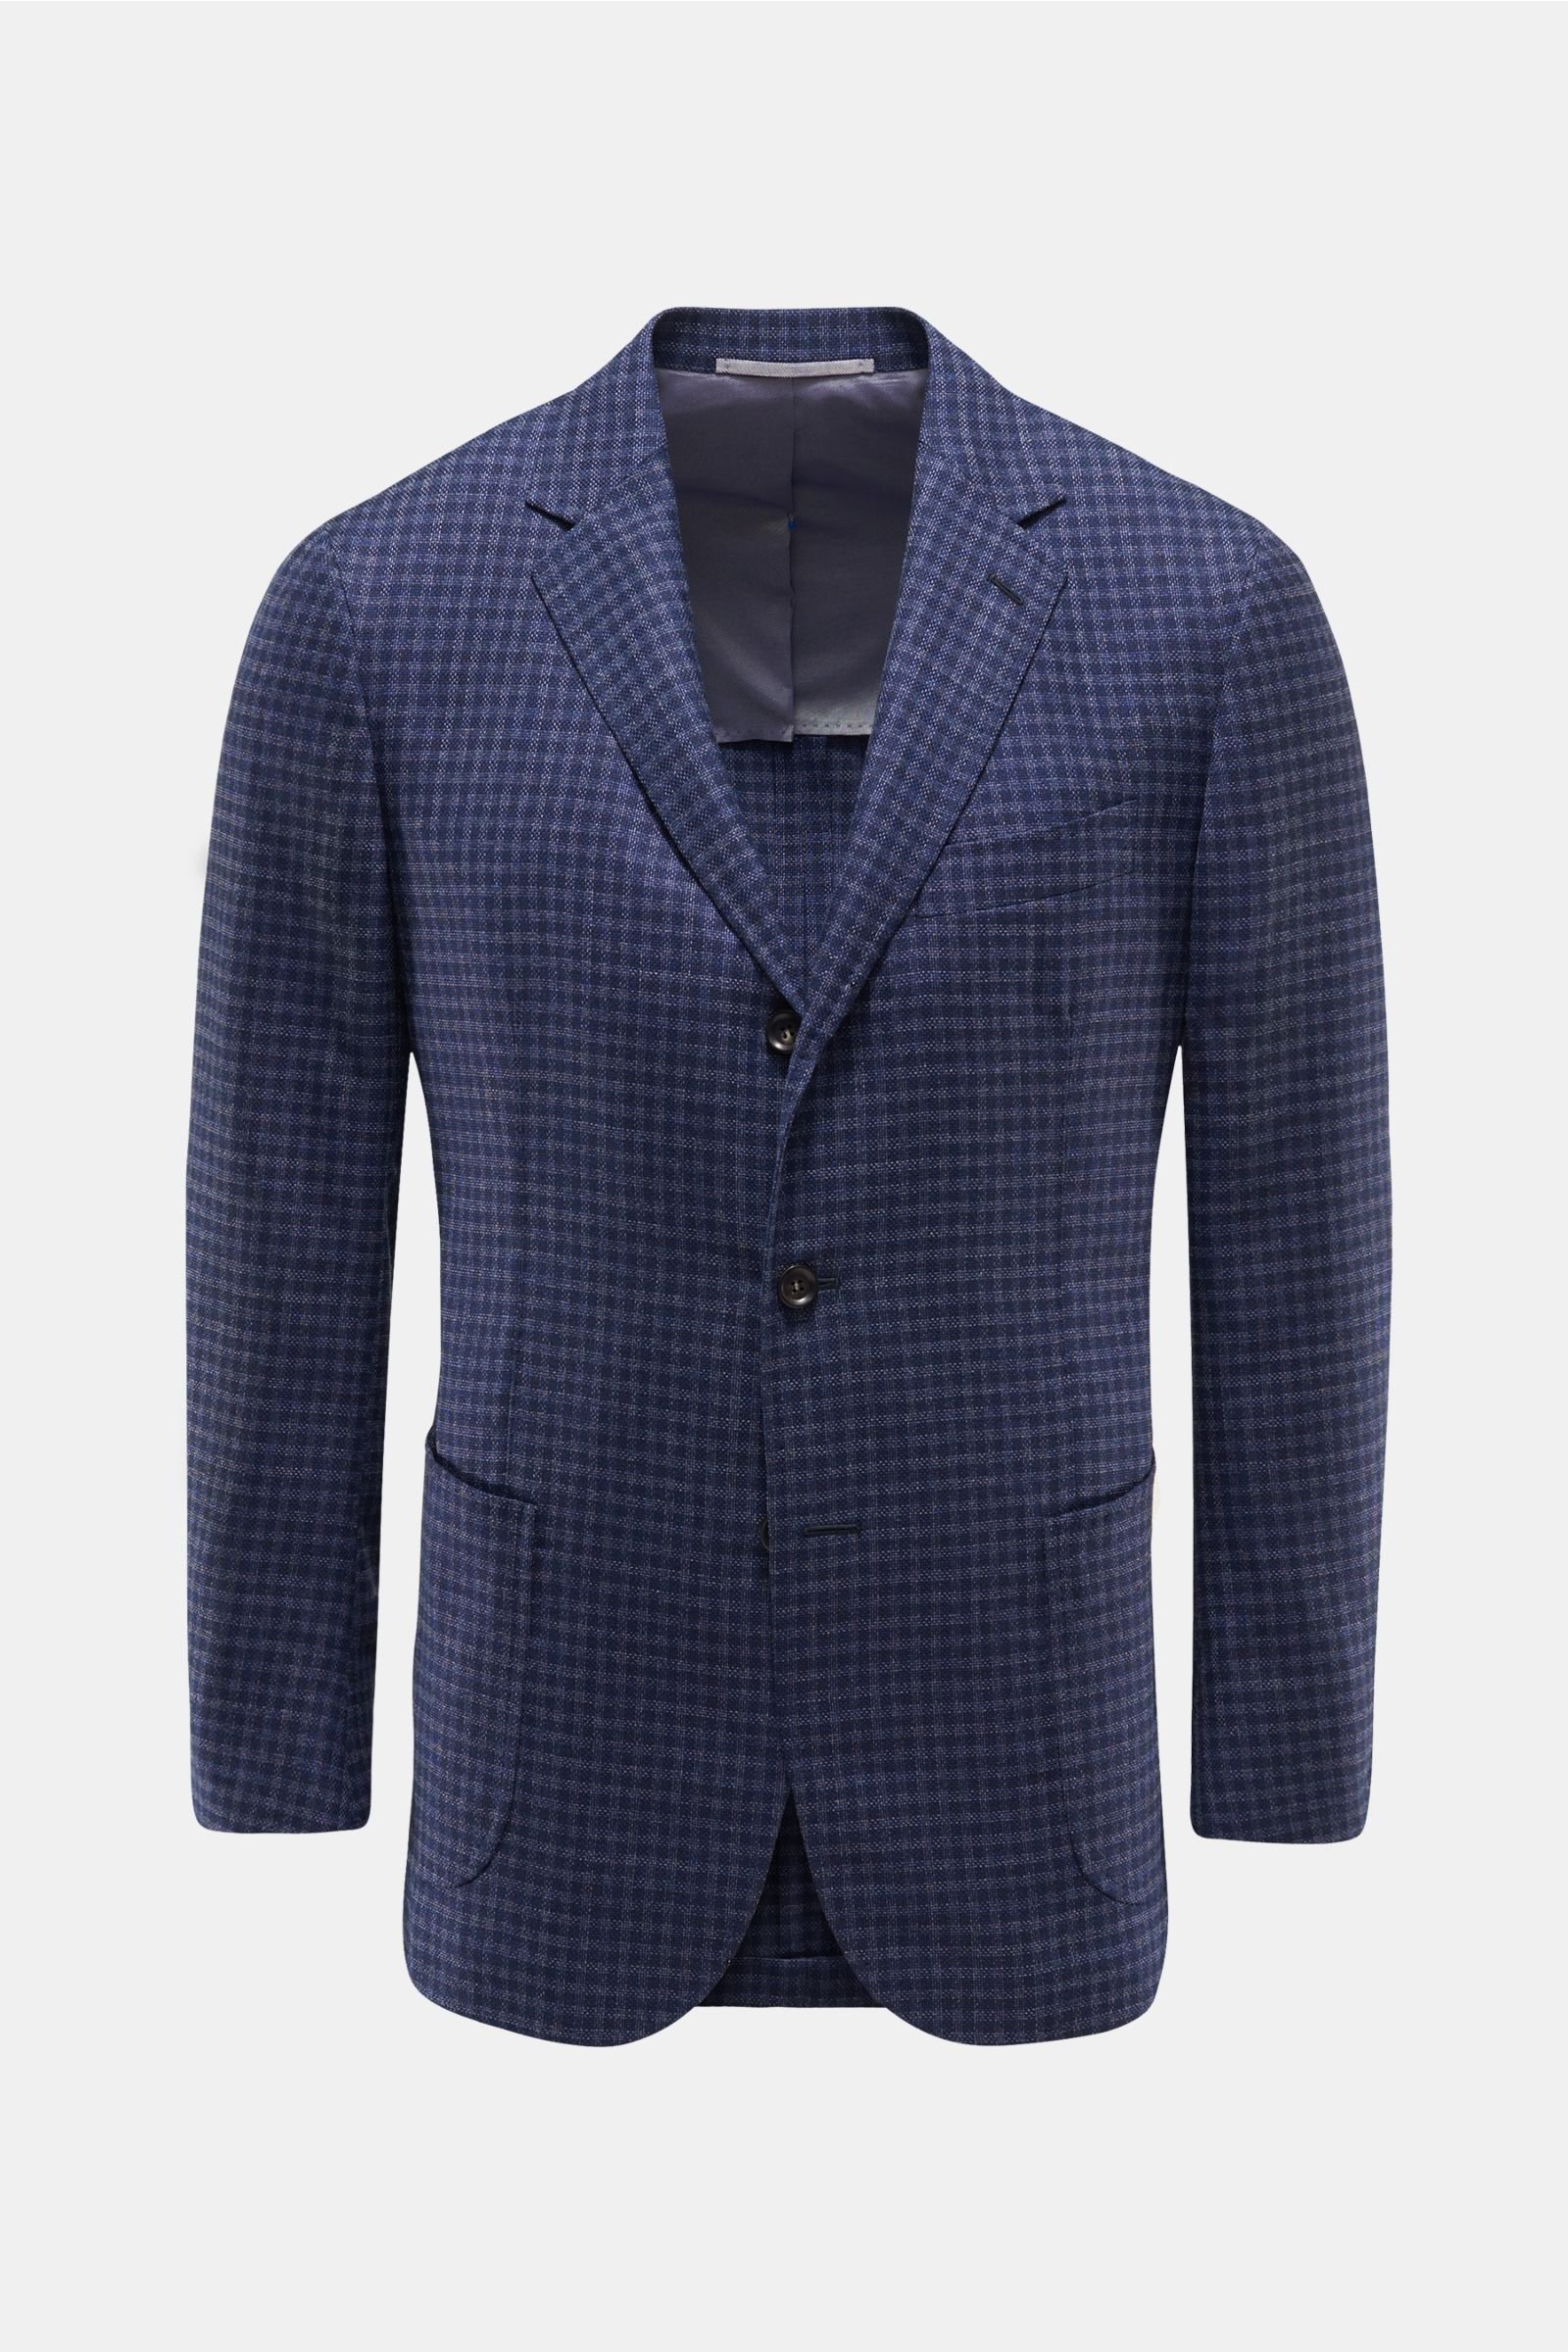 Smart-casual jacket 'Alex' navy checked